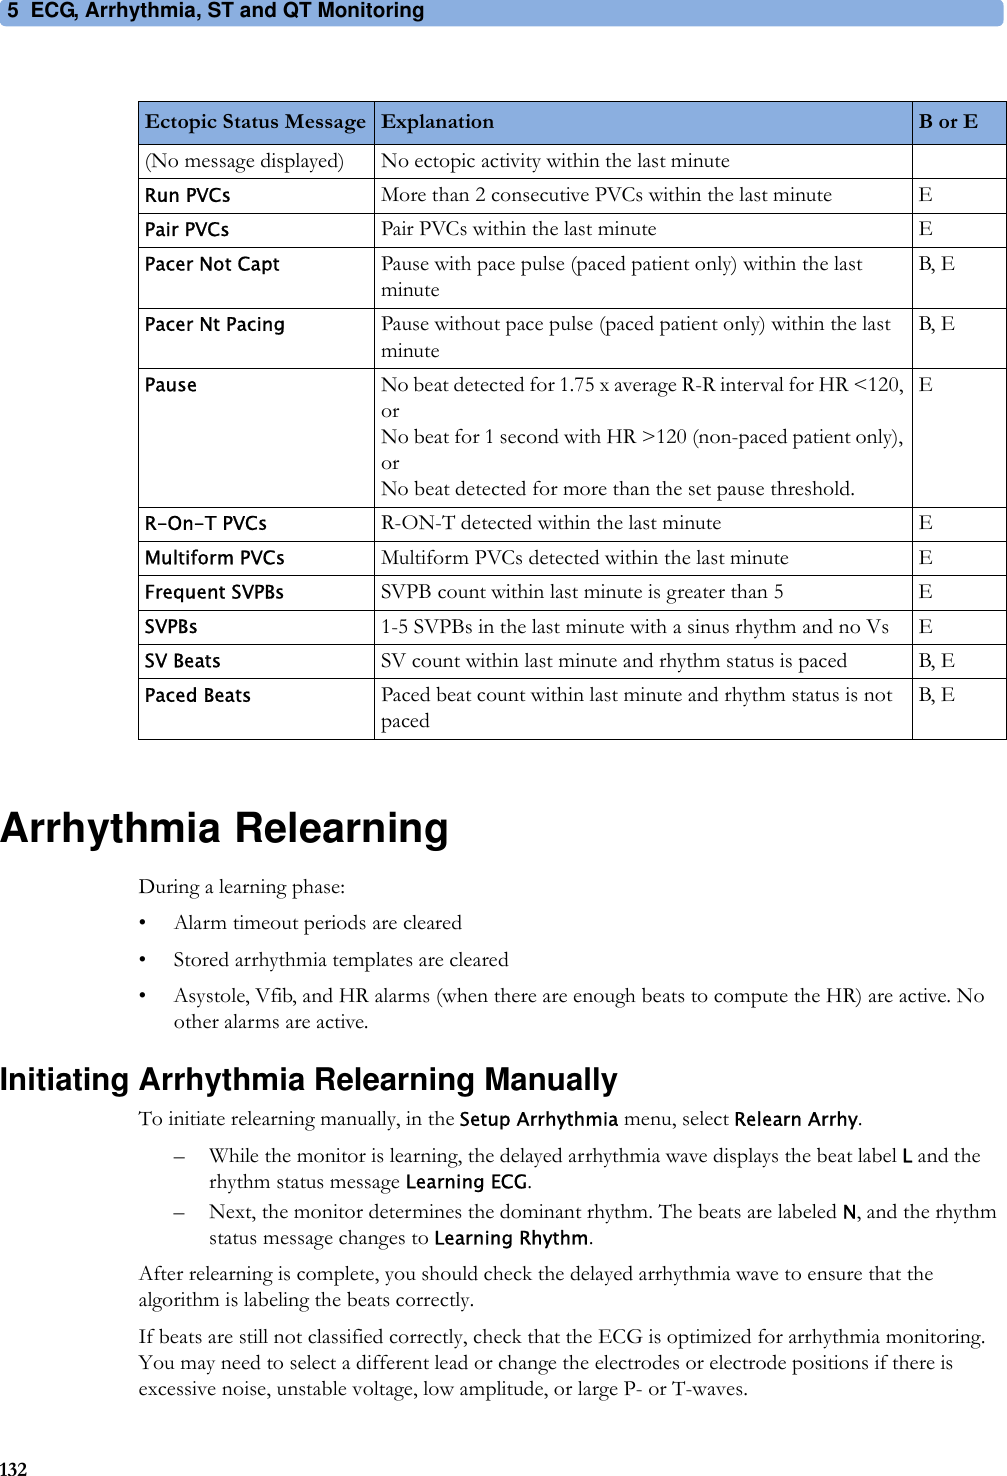 5 ECG, Arrhythmia, ST and QT Monitoring132Arrhythmia RelearningDuring a learning phase:• Alarm timeout periods are cleared• Stored arrhythmia templates are cleared• Asystole, Vfib, and HR alarms (when there are enough beats to compute the HR) are active. No other alarms are active.Initiating Arrhythmia Relearning ManuallyTo initiate relearning manually, in the Setup Arrhythmia menu, select Relearn Arrhy.– While the monitor is learning, the delayed arrhythmia wave displays the beat label L and the rhythm status message Learning ECG.– Next, the monitor determines the dominant rhythm. The beats are labeled N, and the rhythm status message changes to Learning Rhythm.After relearning is complete, you should check the delayed arrhythmia wave to ensure that the algorithm is labeling the beats correctly.If beats are still not classified correctly, check that the ECG is optimized for arrhythmia monitoring. You may need to select a different lead or change the electrodes or electrode positions if there is excessive noise, unstable voltage, low amplitude, or large P- or T-waves.Ectopic Status Message Explanation B or E(No message displayed) No ectopic activity within the last minuteRun PVCs More than 2 consecutive PVCs within the last minute EPair PVCs Pair PVCs within the last minute EPacer Not Capt Pause with pace pulse (paced patient only) within the last minuteB, EPacer Nt Pacing Pause without pace pulse (paced patient only) within the last minuteB, EPause No beat detected for 1.75 x average R-R interval for HR &lt;120, or No beat for 1 second with HR &gt;120 (non-paced patient only), or No beat detected for more than the set pause threshold.ER-On-T PVCs R-ON-T detected within the last minute EMultiform PVCs Multiform PVCs detected within the last minute EFrequent SVPBs SVPB count within last minute is greater than 5 ESVPBs 1-5 SVPBs in the last minute with a sinus rhythm and no Vs ESV Beats SV count within last minute and rhythm status is paced B, EPaced Beats Paced beat count within last minute and rhythm status is not pacedB, E